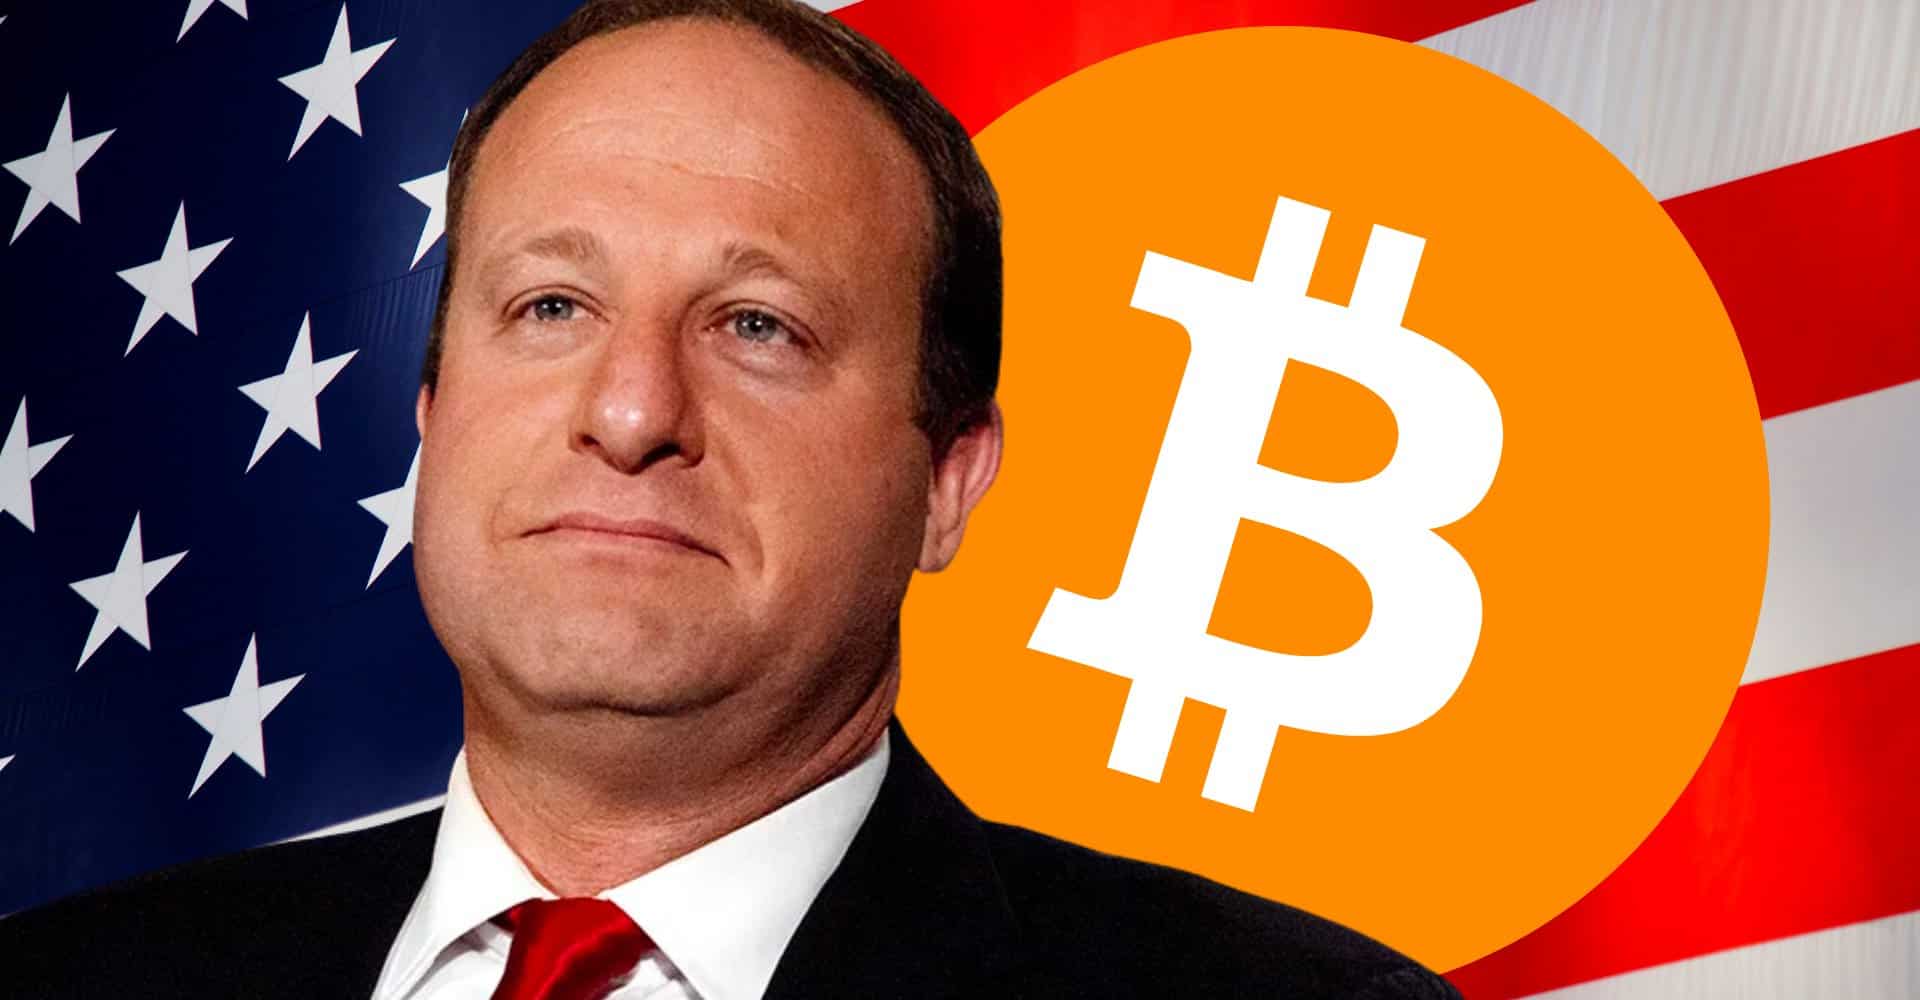 Colorado Gov. Jared Polis plans to accept tax payments in crypto